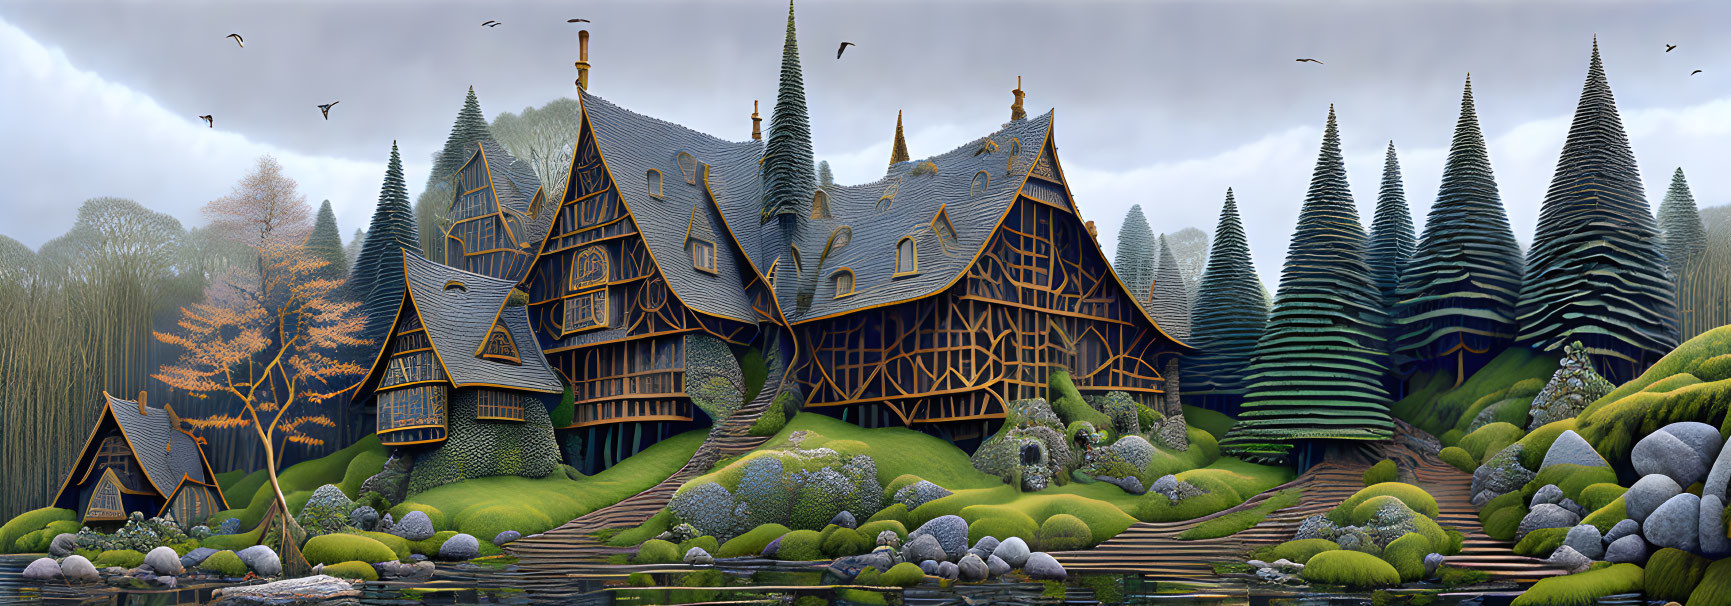 Ornate wooden house in fantasy landscape with spiral trees